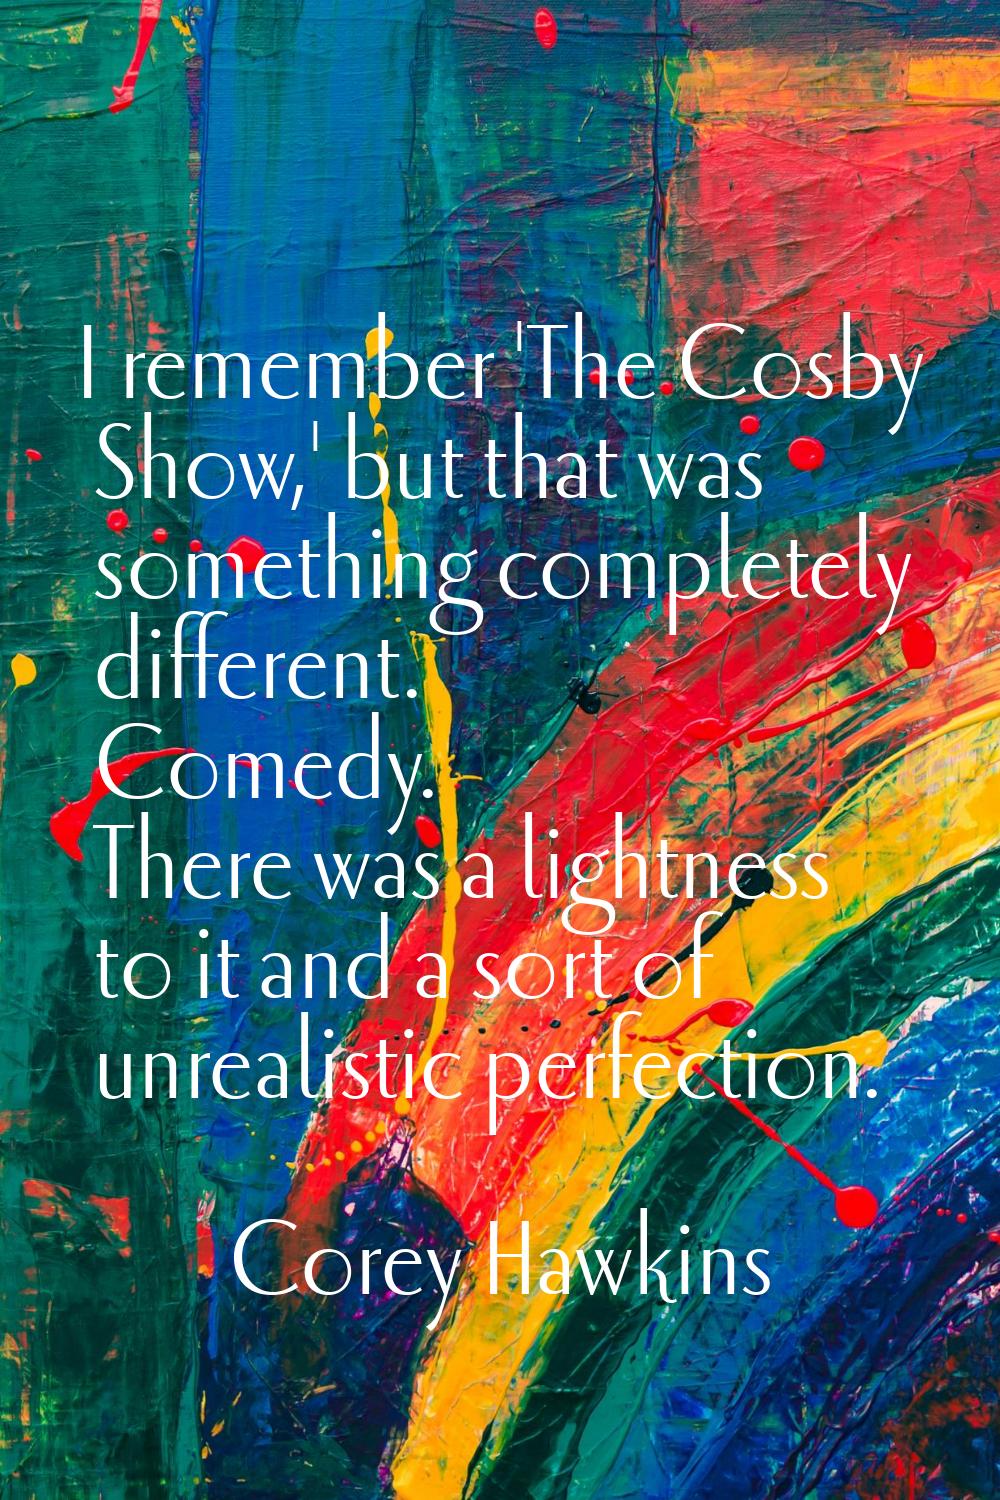 I remember 'The Cosby Show,' but that was something completely different. Comedy. There was a light